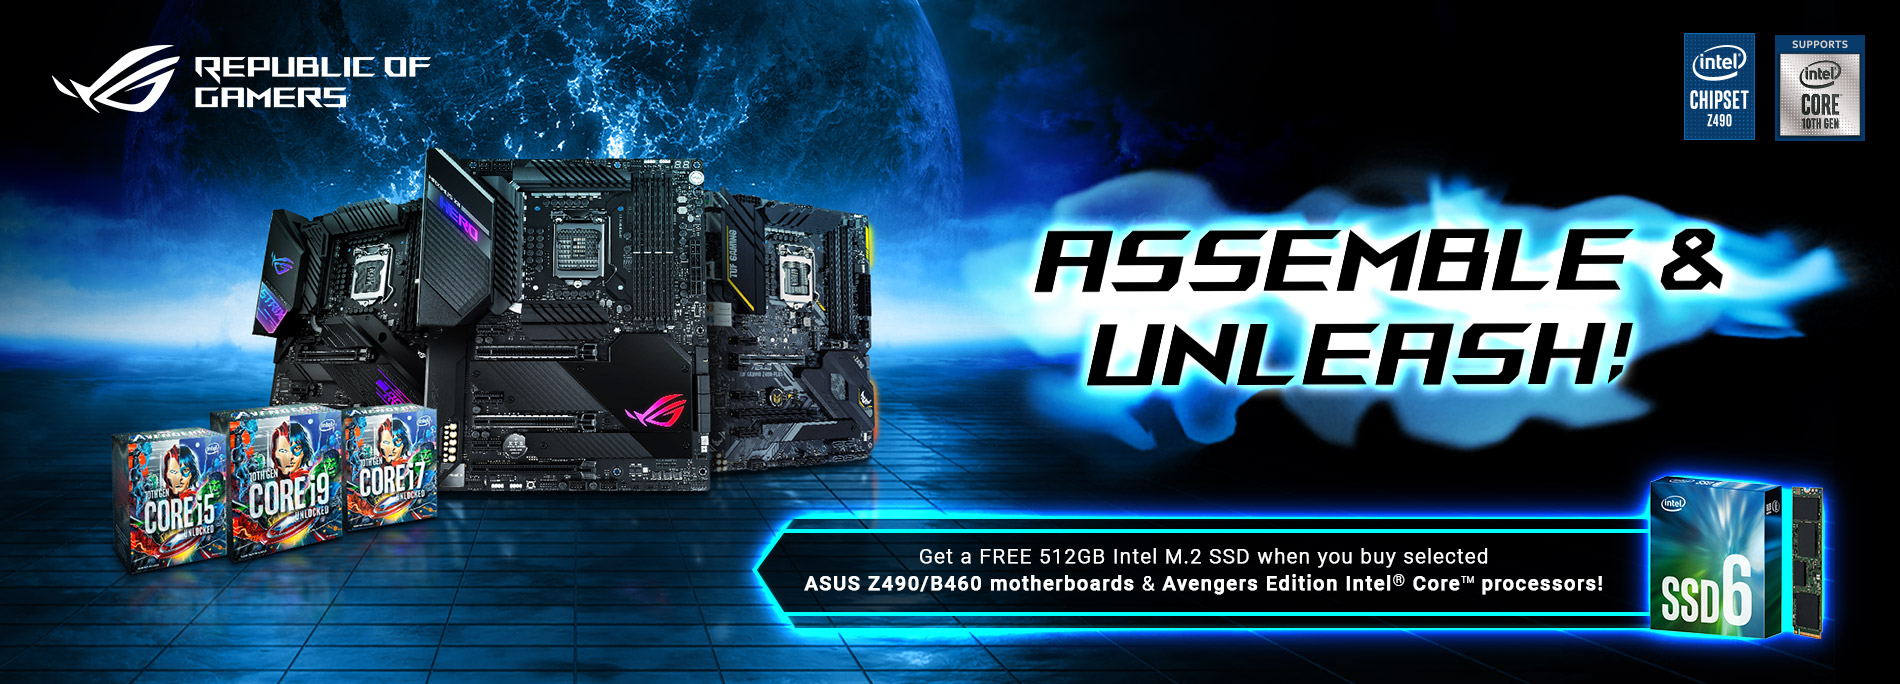 ASUS Z490 / B460 & Intel Avengers Edition CPU promotion